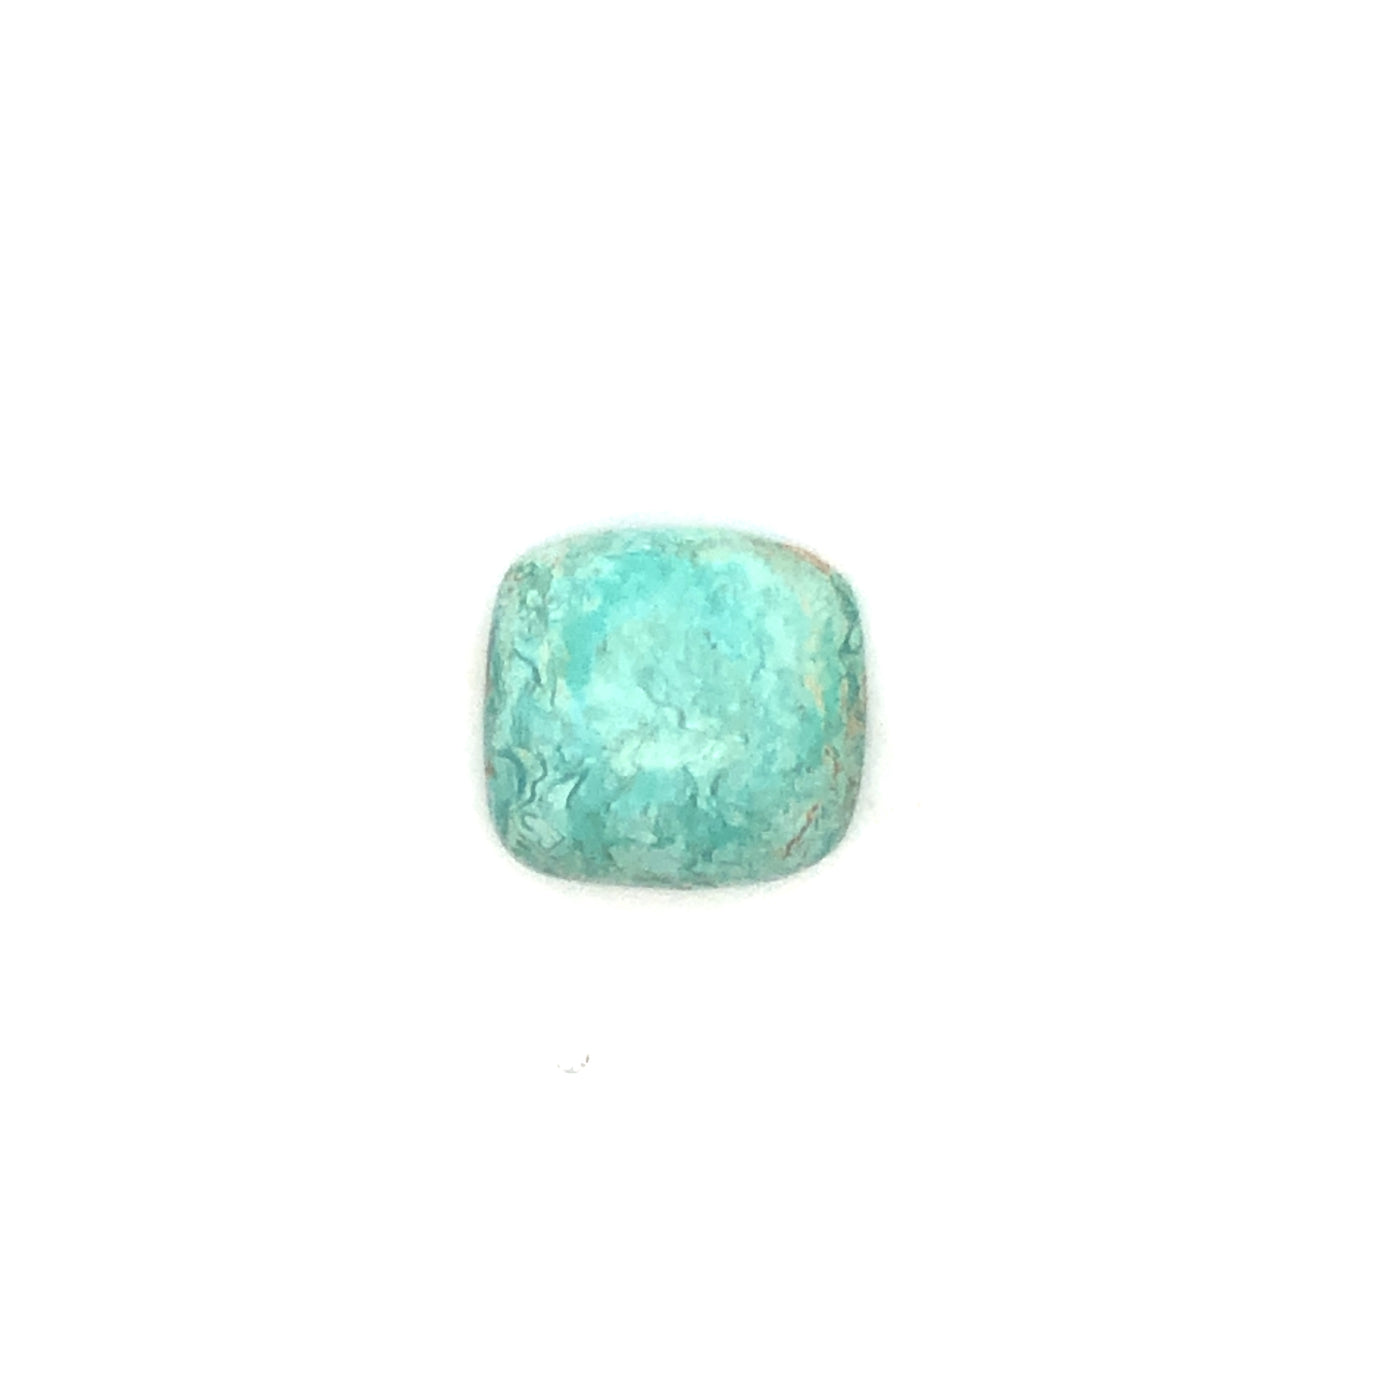 Loose Narooma Turquoise Square Shaped 16.33Ct Blue